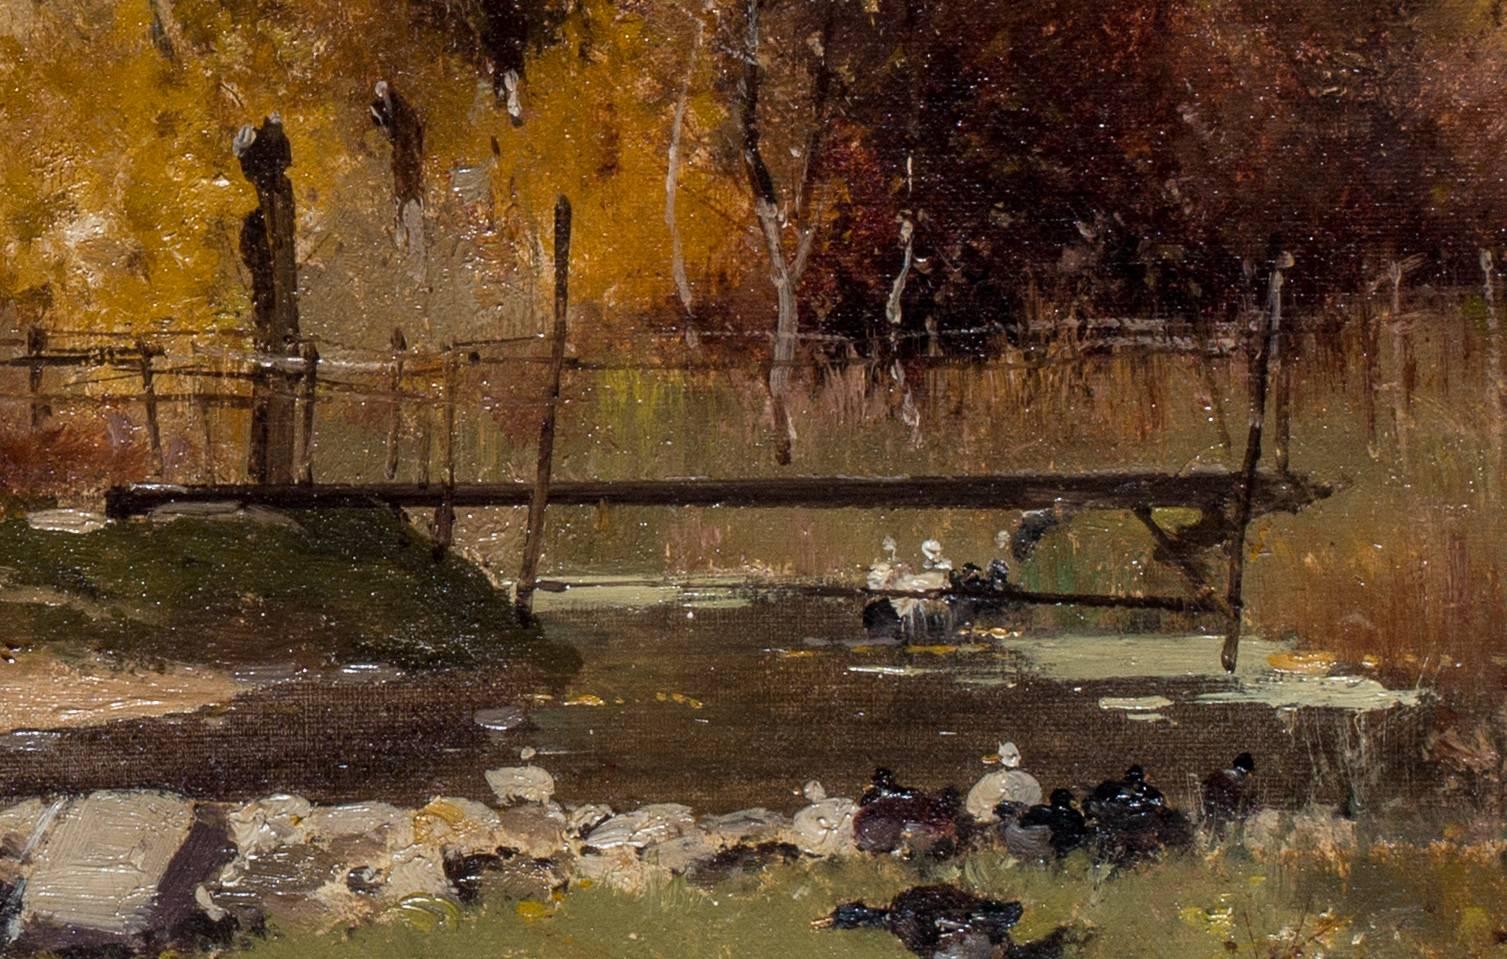 Eugene Galien-Laloue (French, 1854-1941)

‘Ducks by a stream’
A beautiful depiction of ducks by the side of a stream, with orange and brown shades of fall, and a bridge and figure beyond.

Signed with pseudonym ‘LIEVIN’

Oil on canvas

13 x